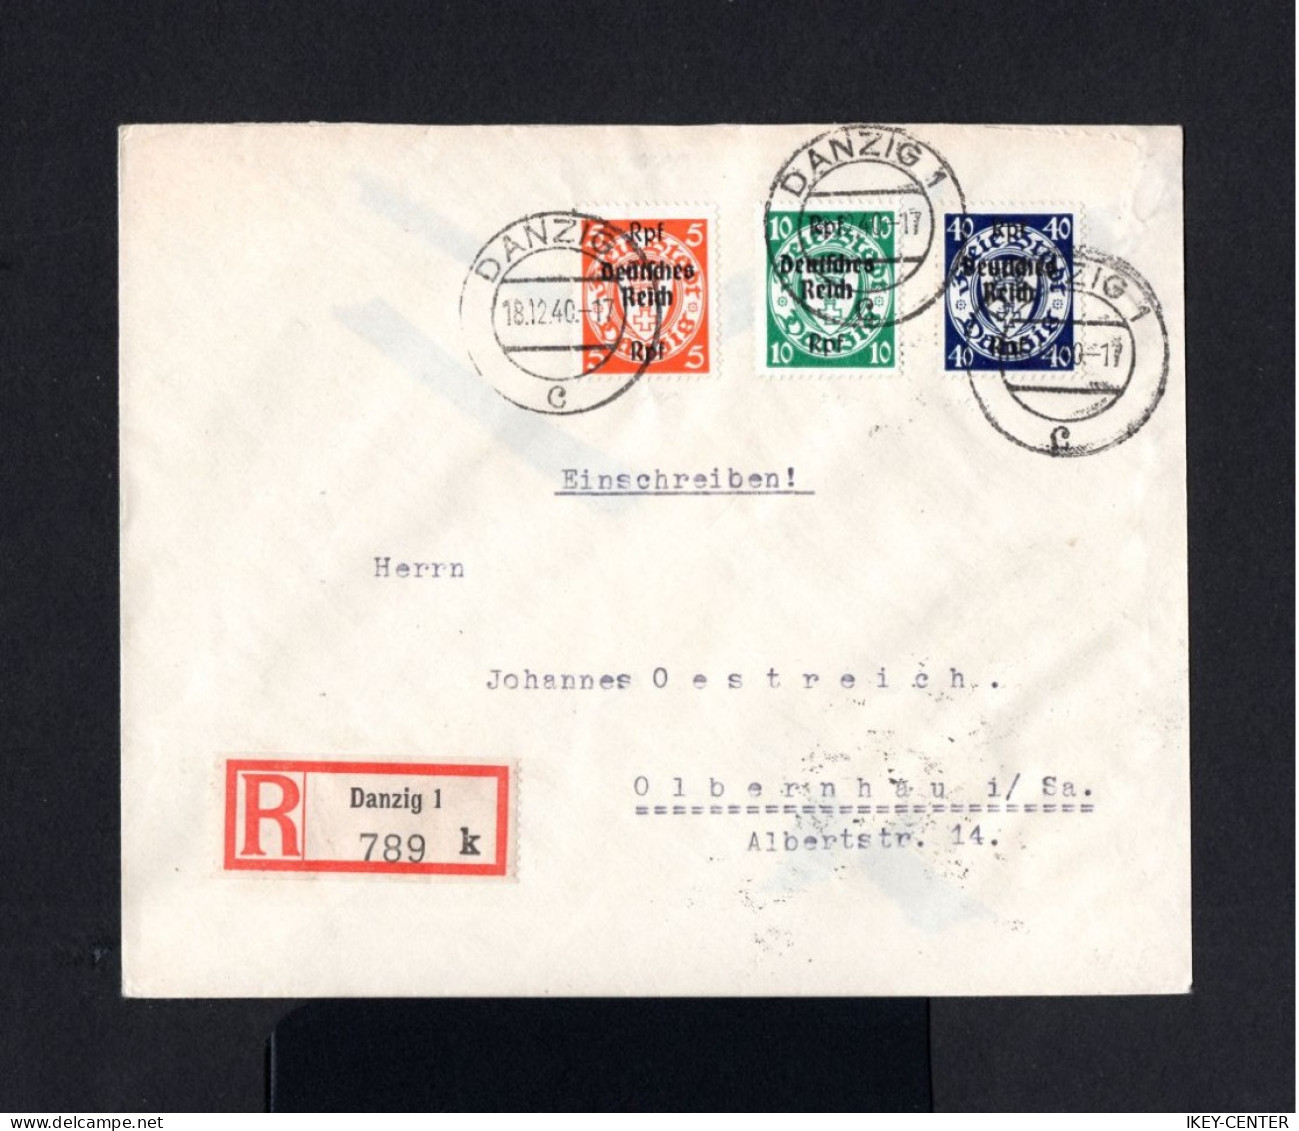 12439-GERMANY-DANZIG STATE.REGISTERED COVER DANZIG To OLBERNHAU.1940 WWII.DEUTSCHES REICH.Enveloppe RECOMMANDE - Covers & Documents